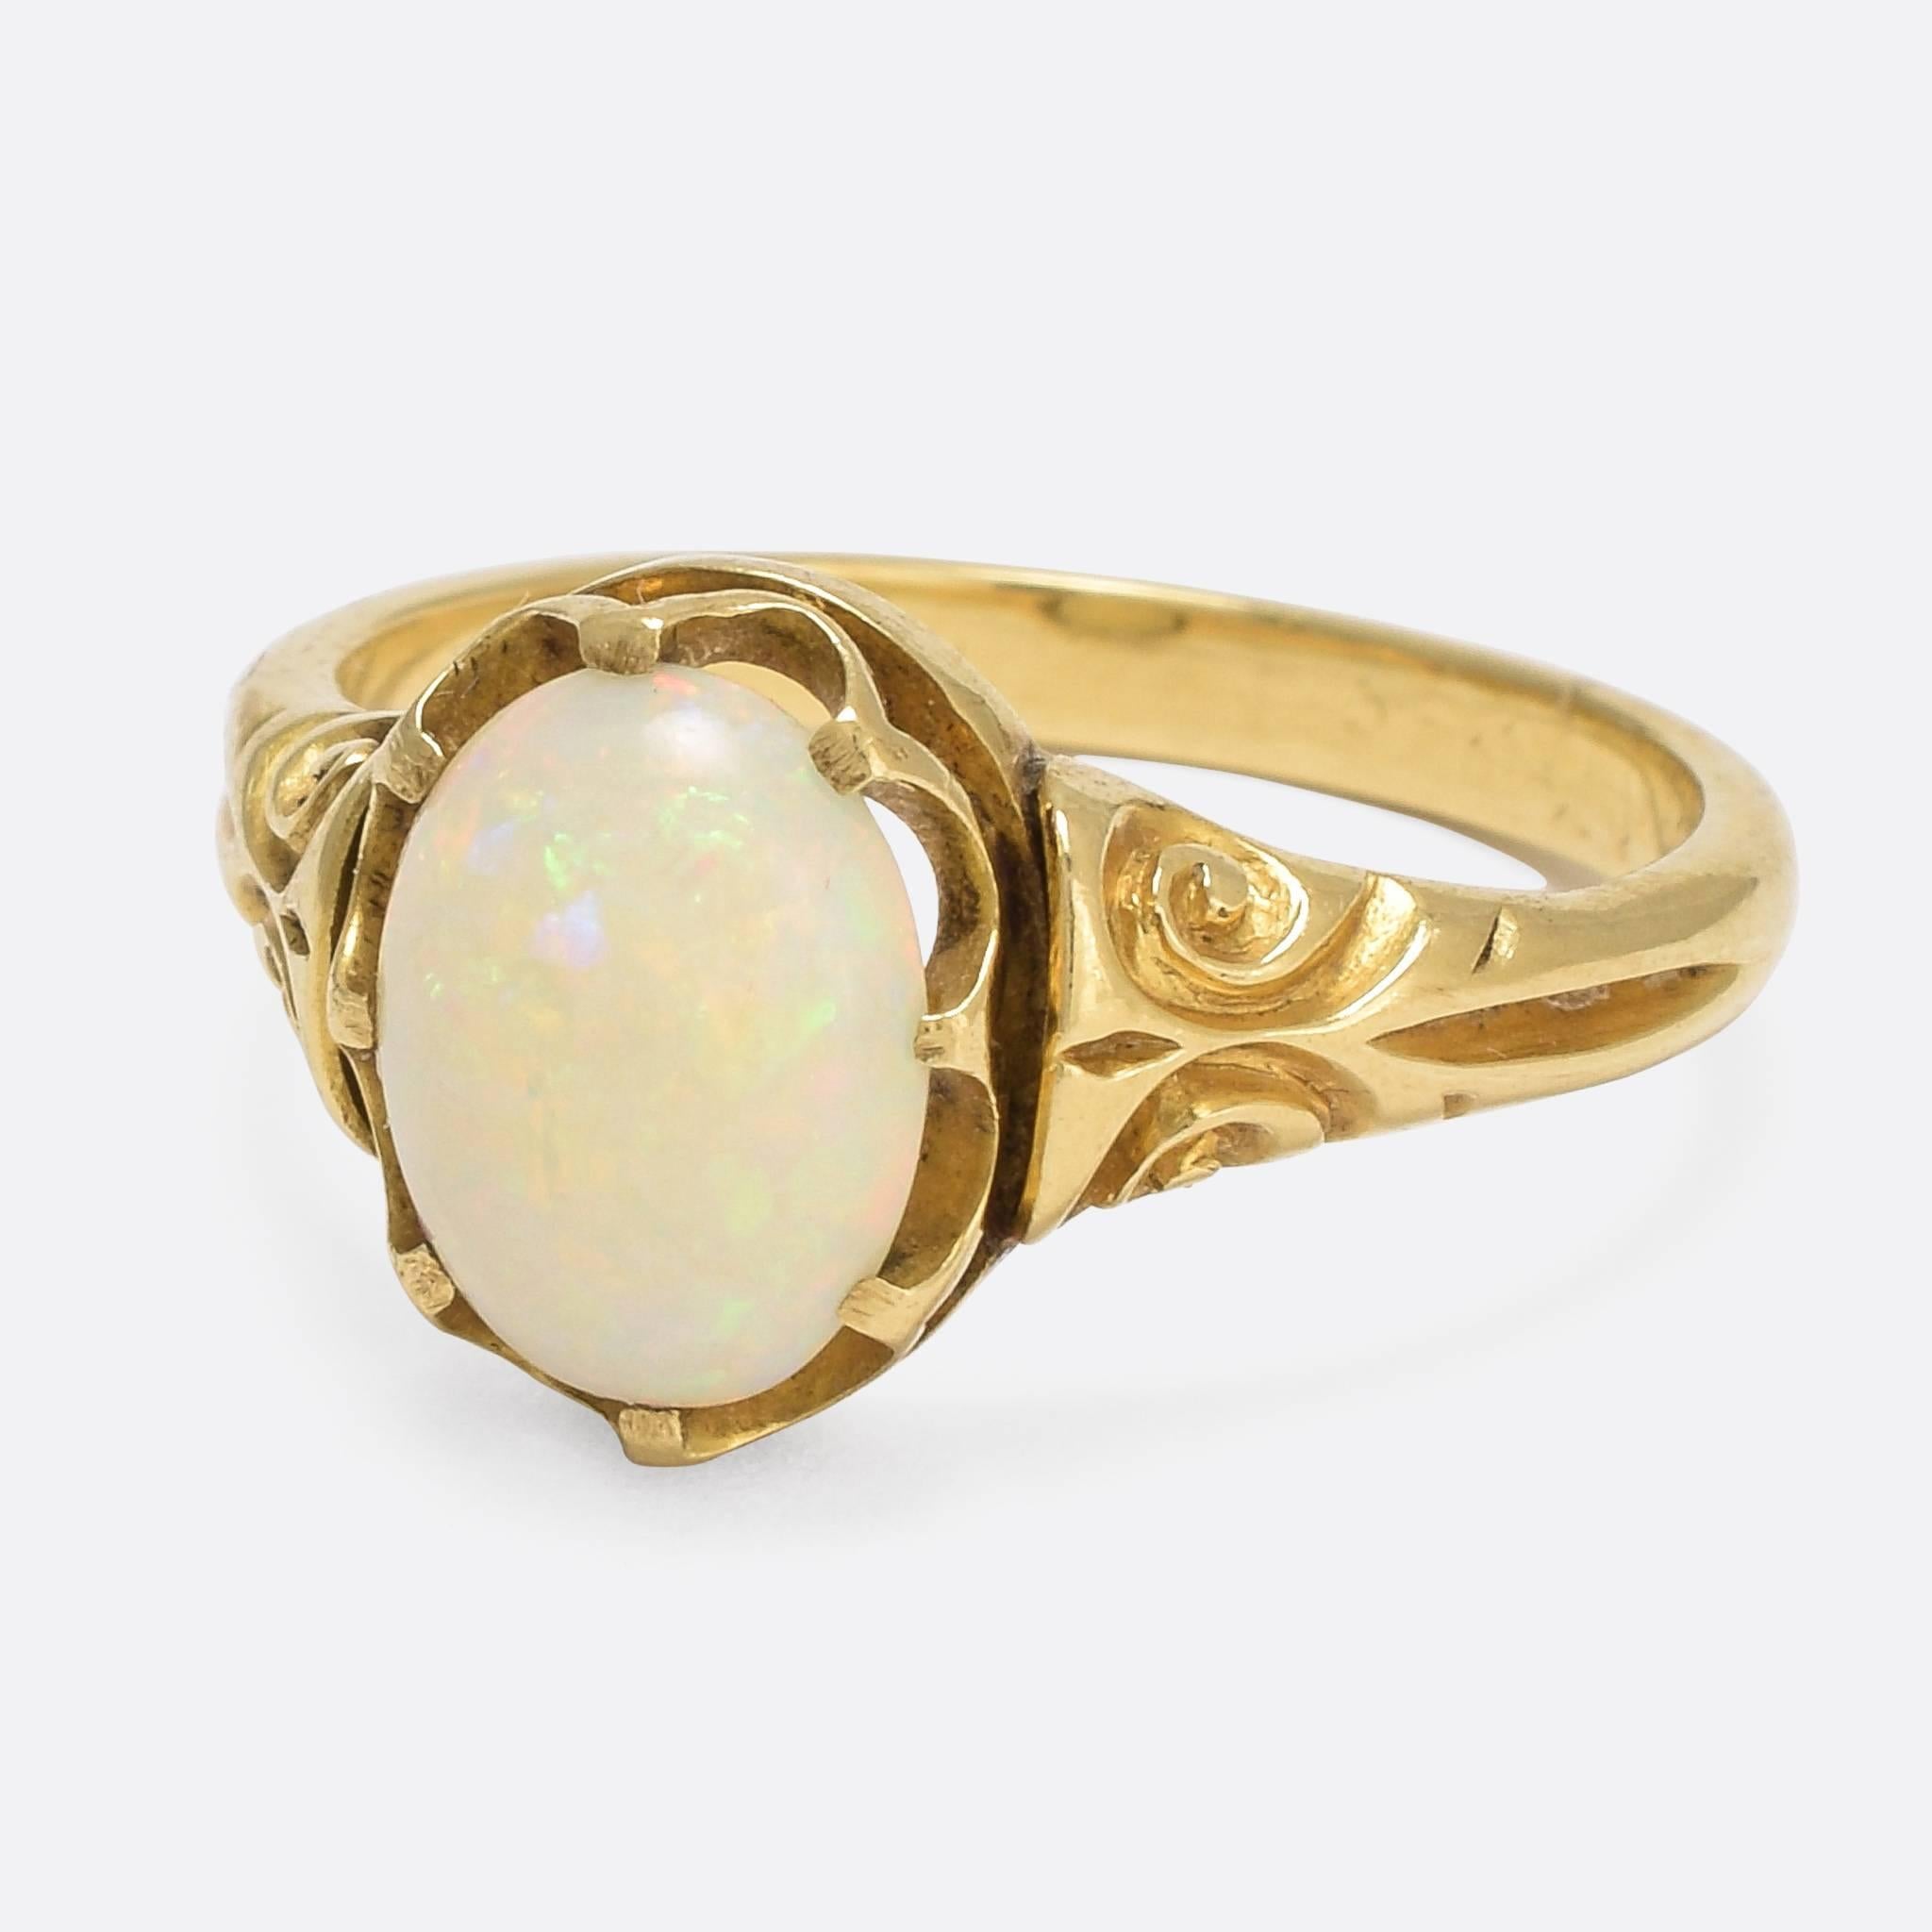 A beautiful antique single stone ring, set with a striking 1.1 carat opal cabochon. The stone displays excellent colour, with flashes of blues, greens, orange, pink and purple - while the 18k gold setting features pretty hand-chased scrolling to the